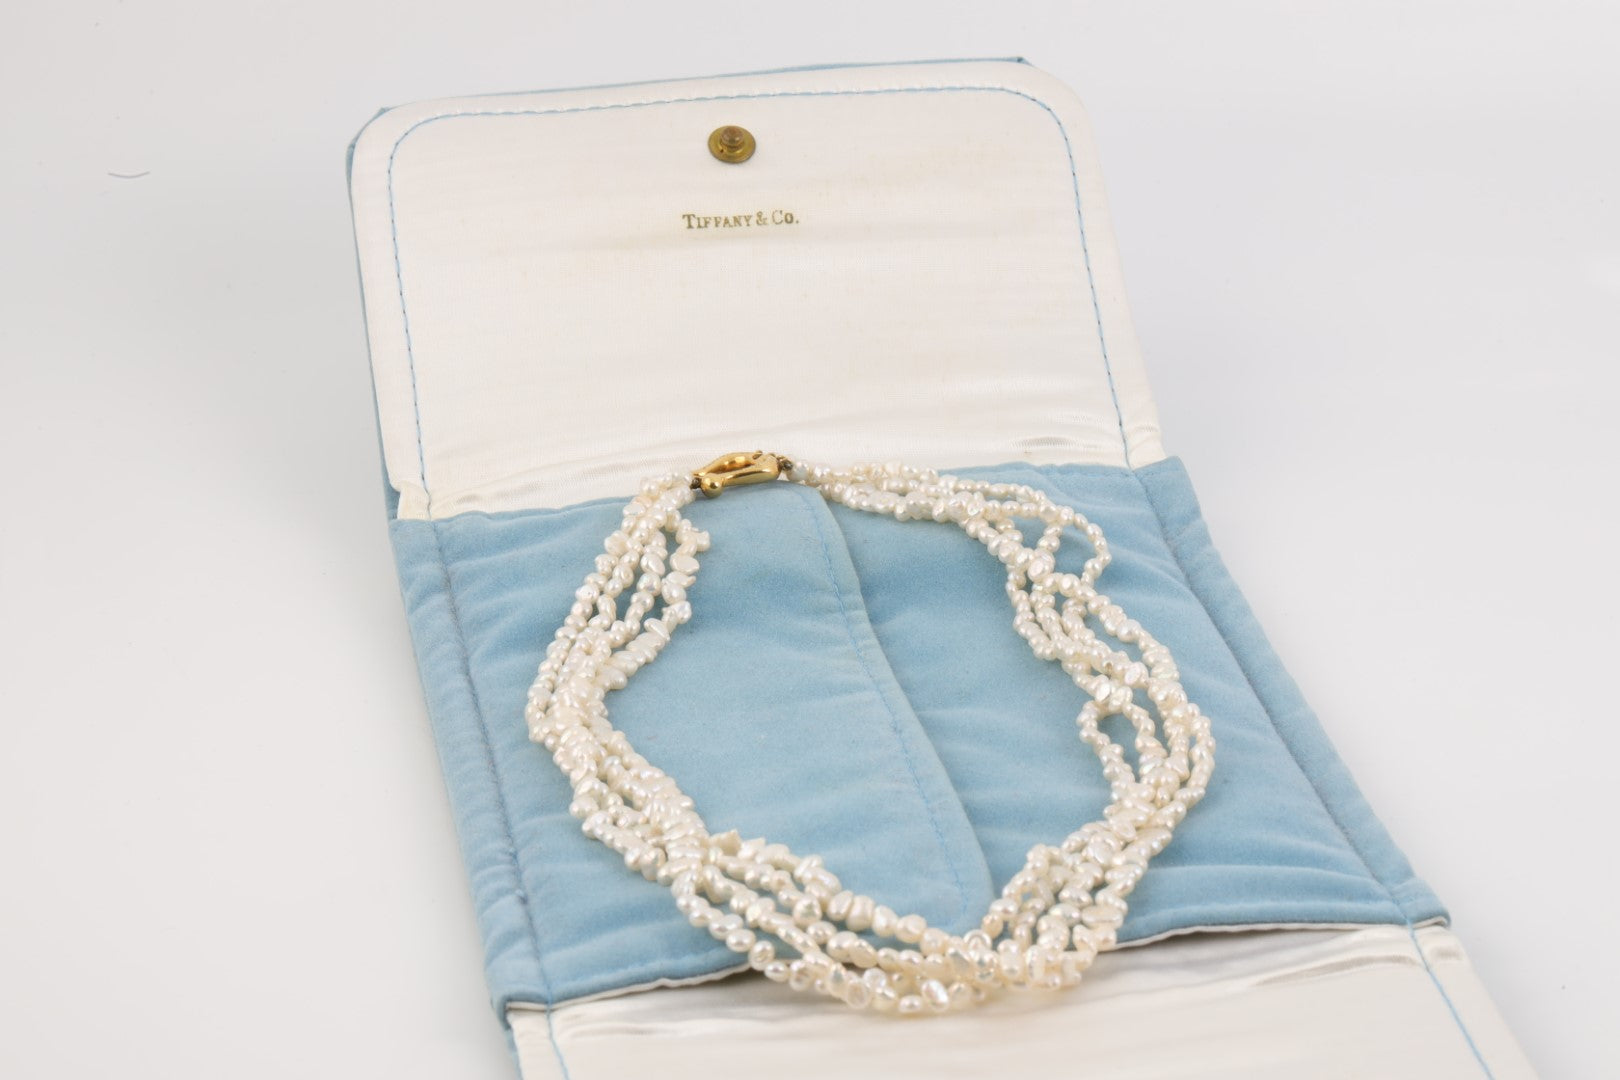 Tiffany and Co pearl necklace 18k white gold signature double x clasp 18  inches | eBay